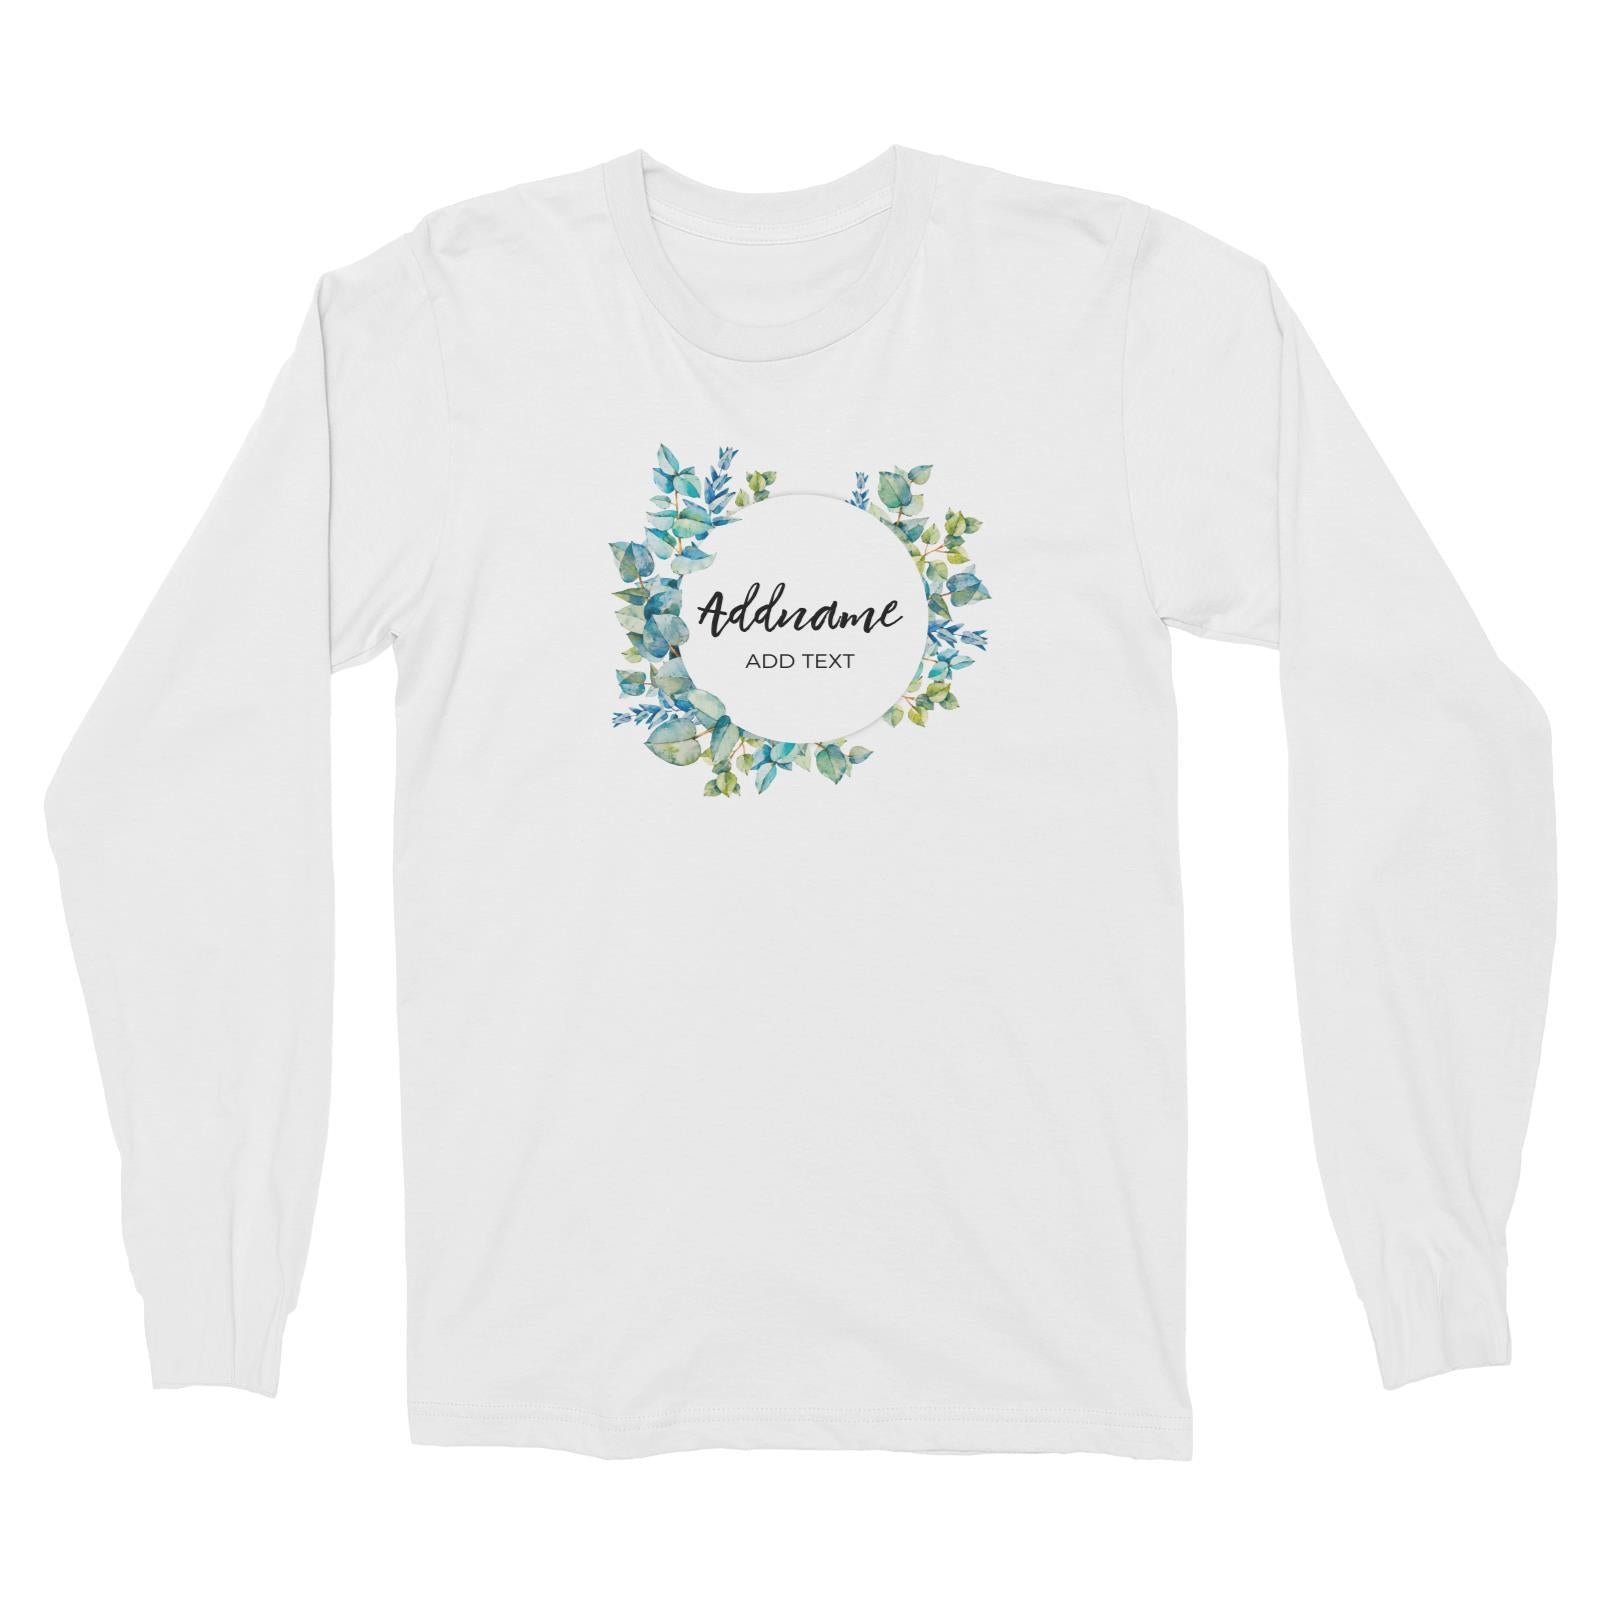 Add Your Own Text Teacher Blue Leaves Wreath Addname And Add Text Long Sleeve Unisex T-Shirt